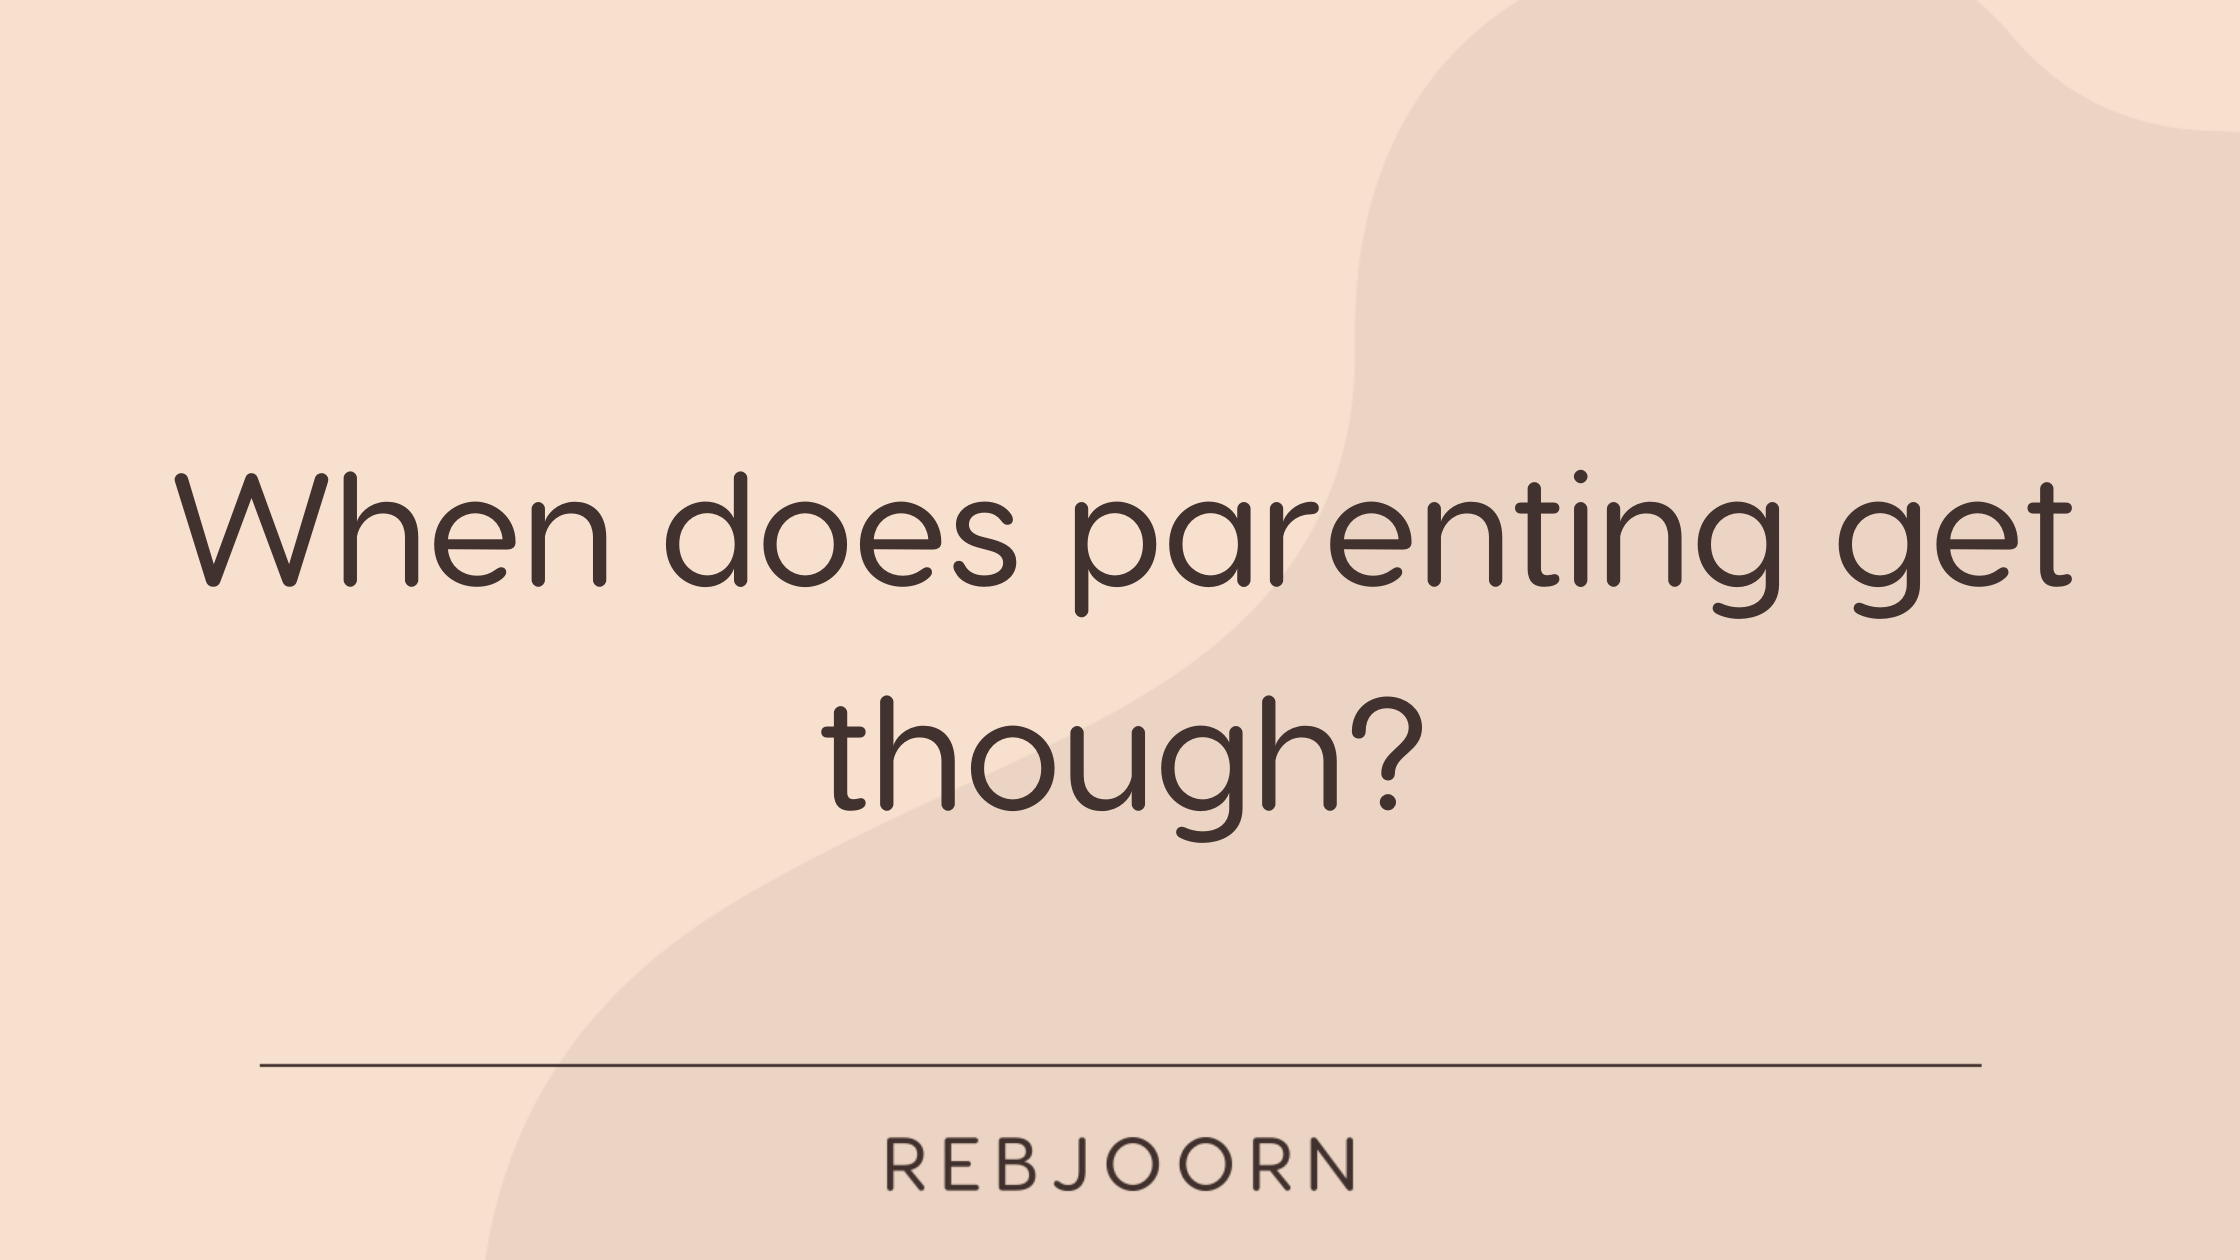 When does parenting get though?